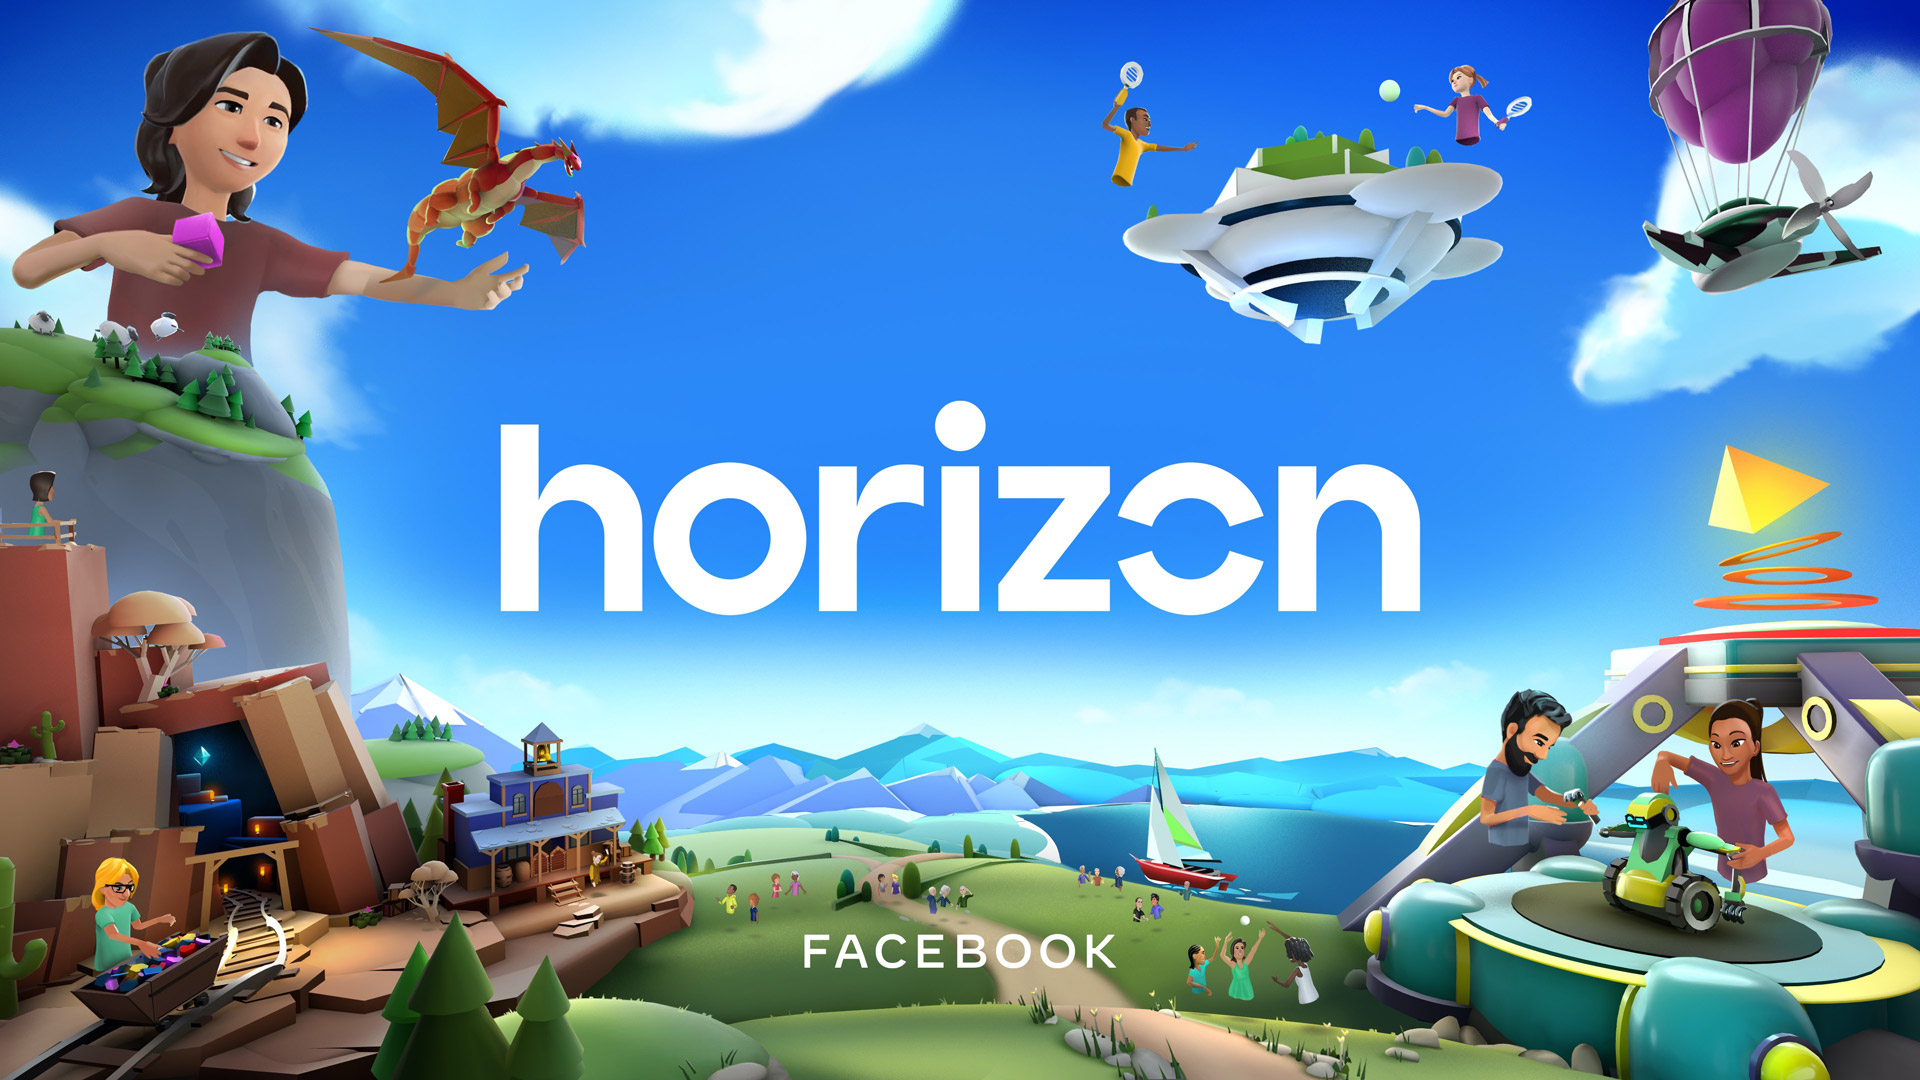 Facebook Horizon Strikes a Balance Between Rec Room and VRChat